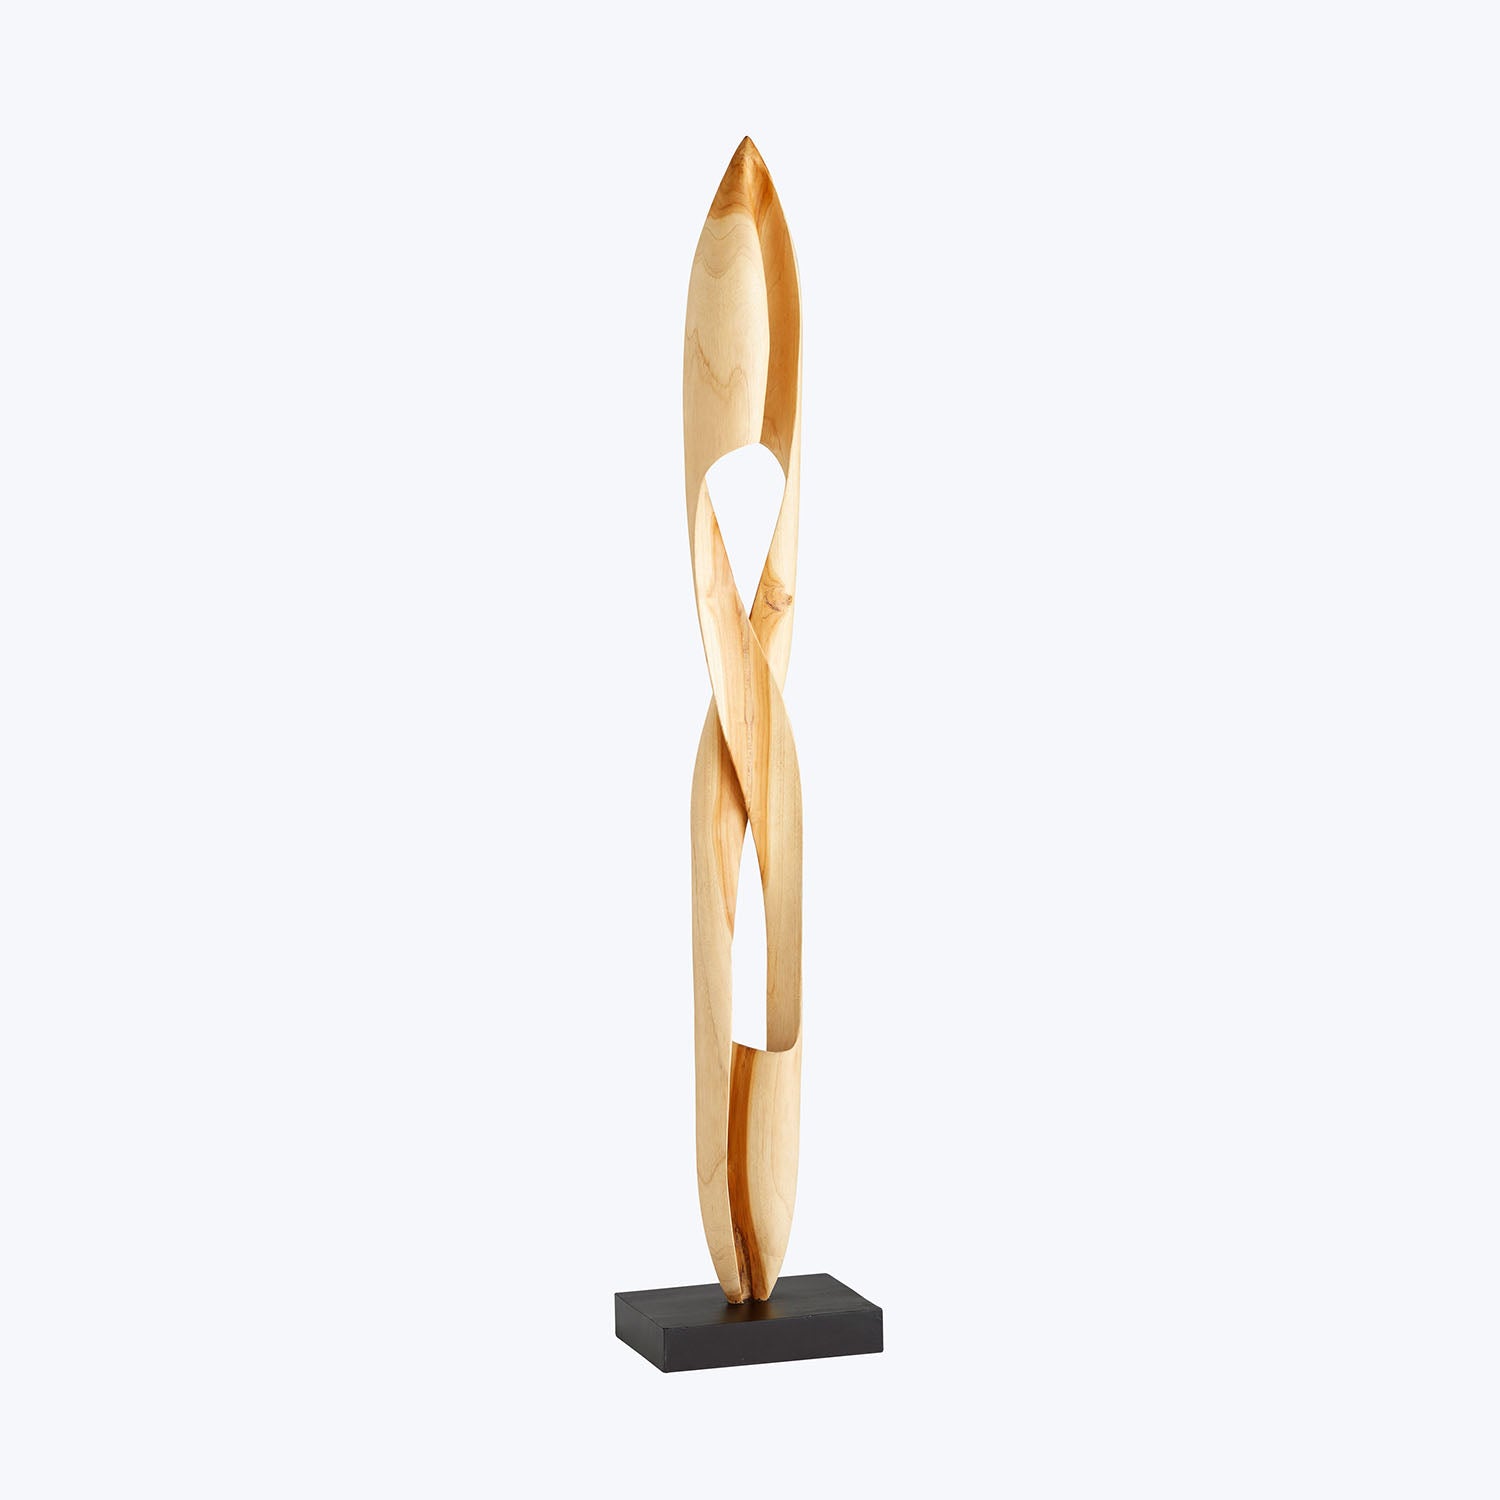 Elegant wooden sculpture on black base portrays fluidity and interconnectedness.